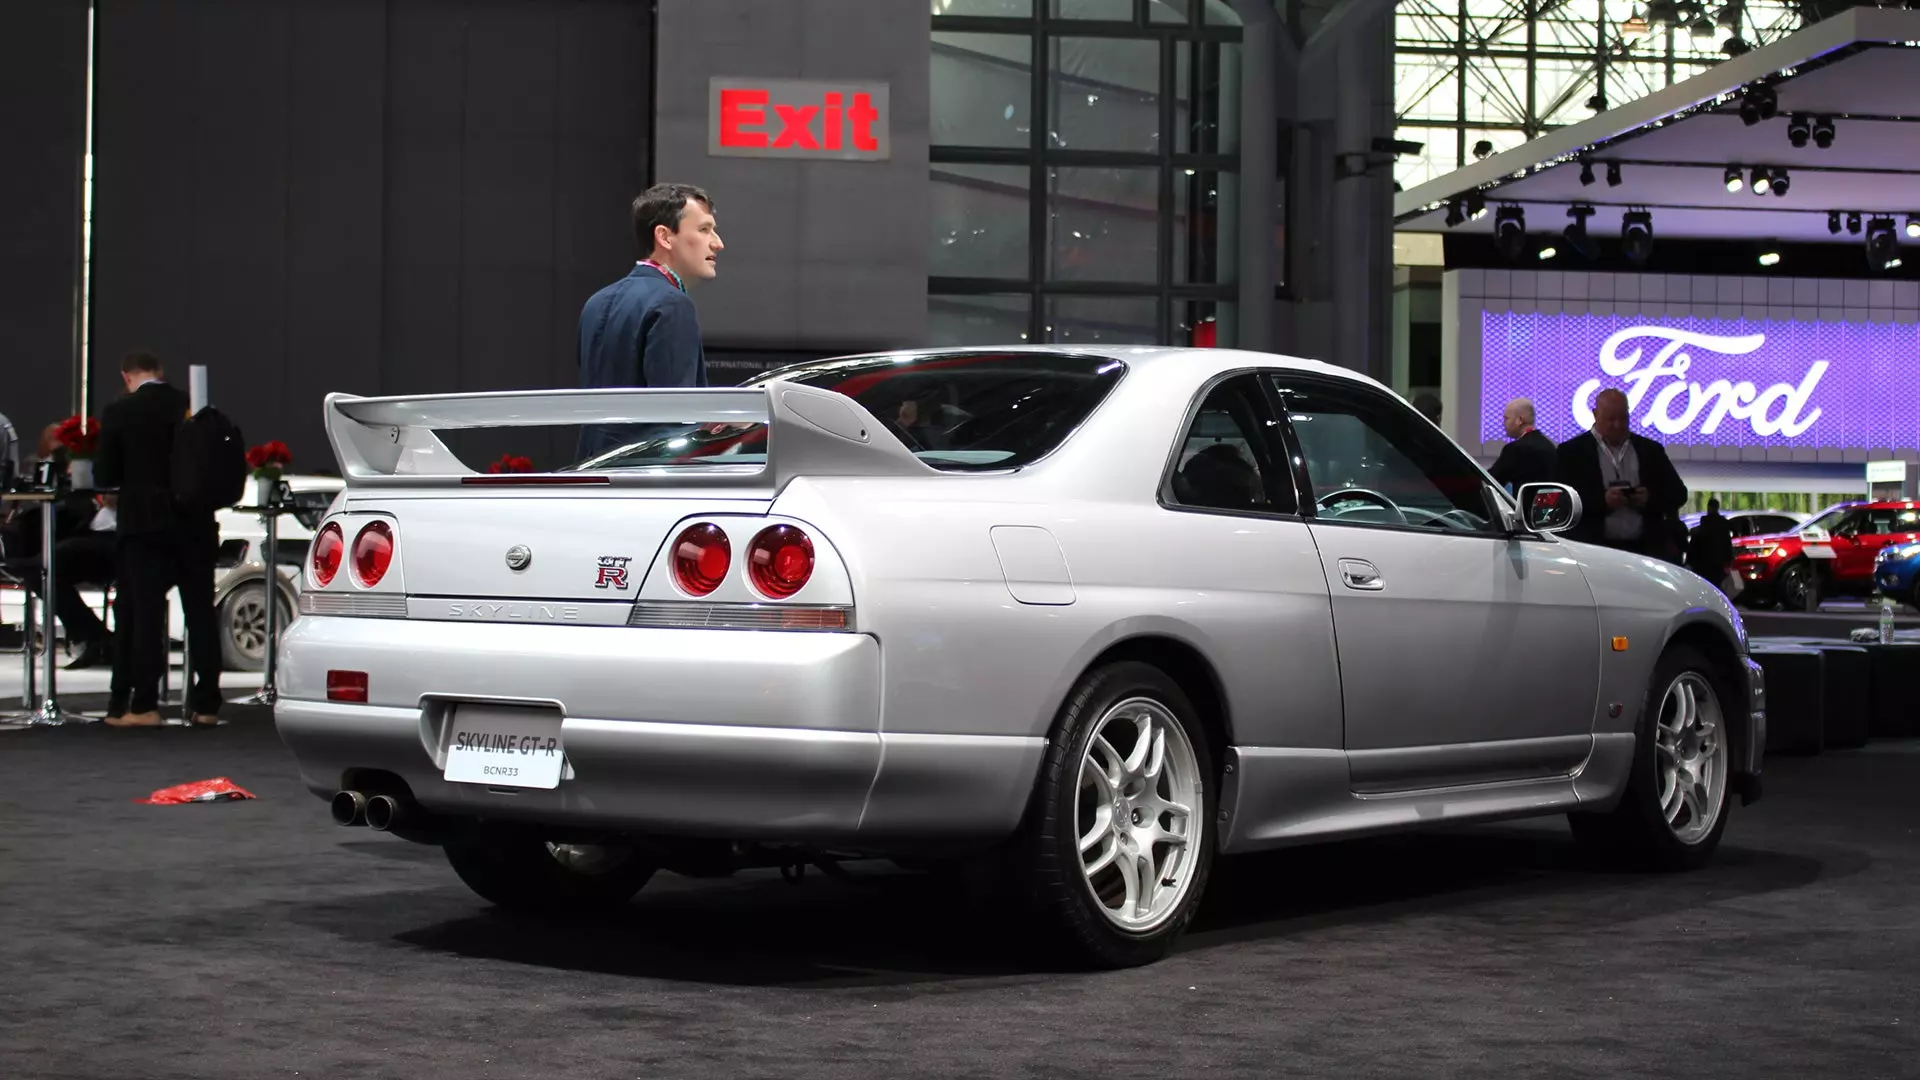 An R33 Nissan Skyline in America Is Cause for Pause